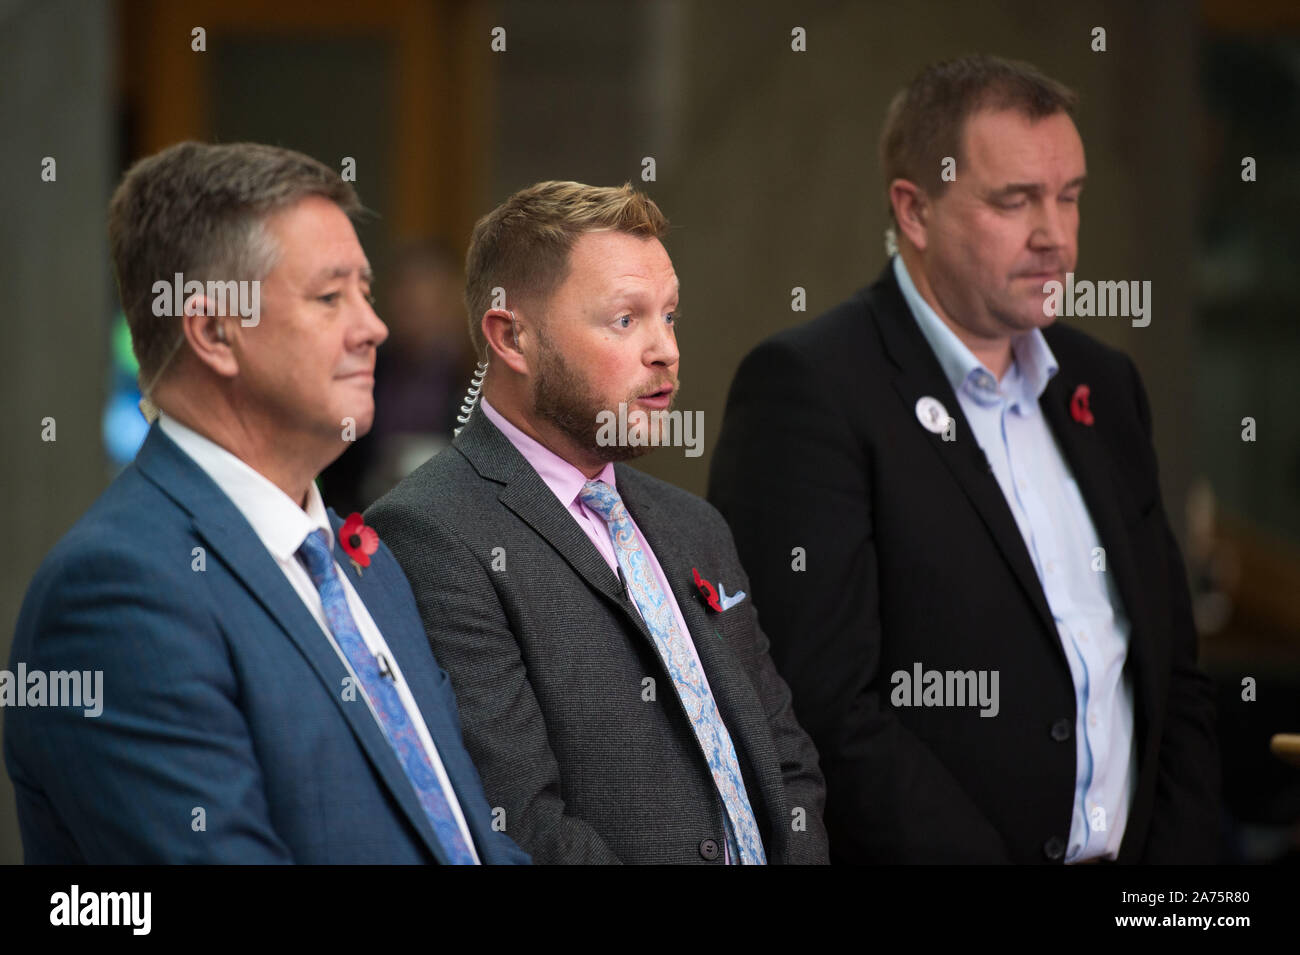 Edinburgh 30 October 2019 Pictured Left Right Keith Brown Msp